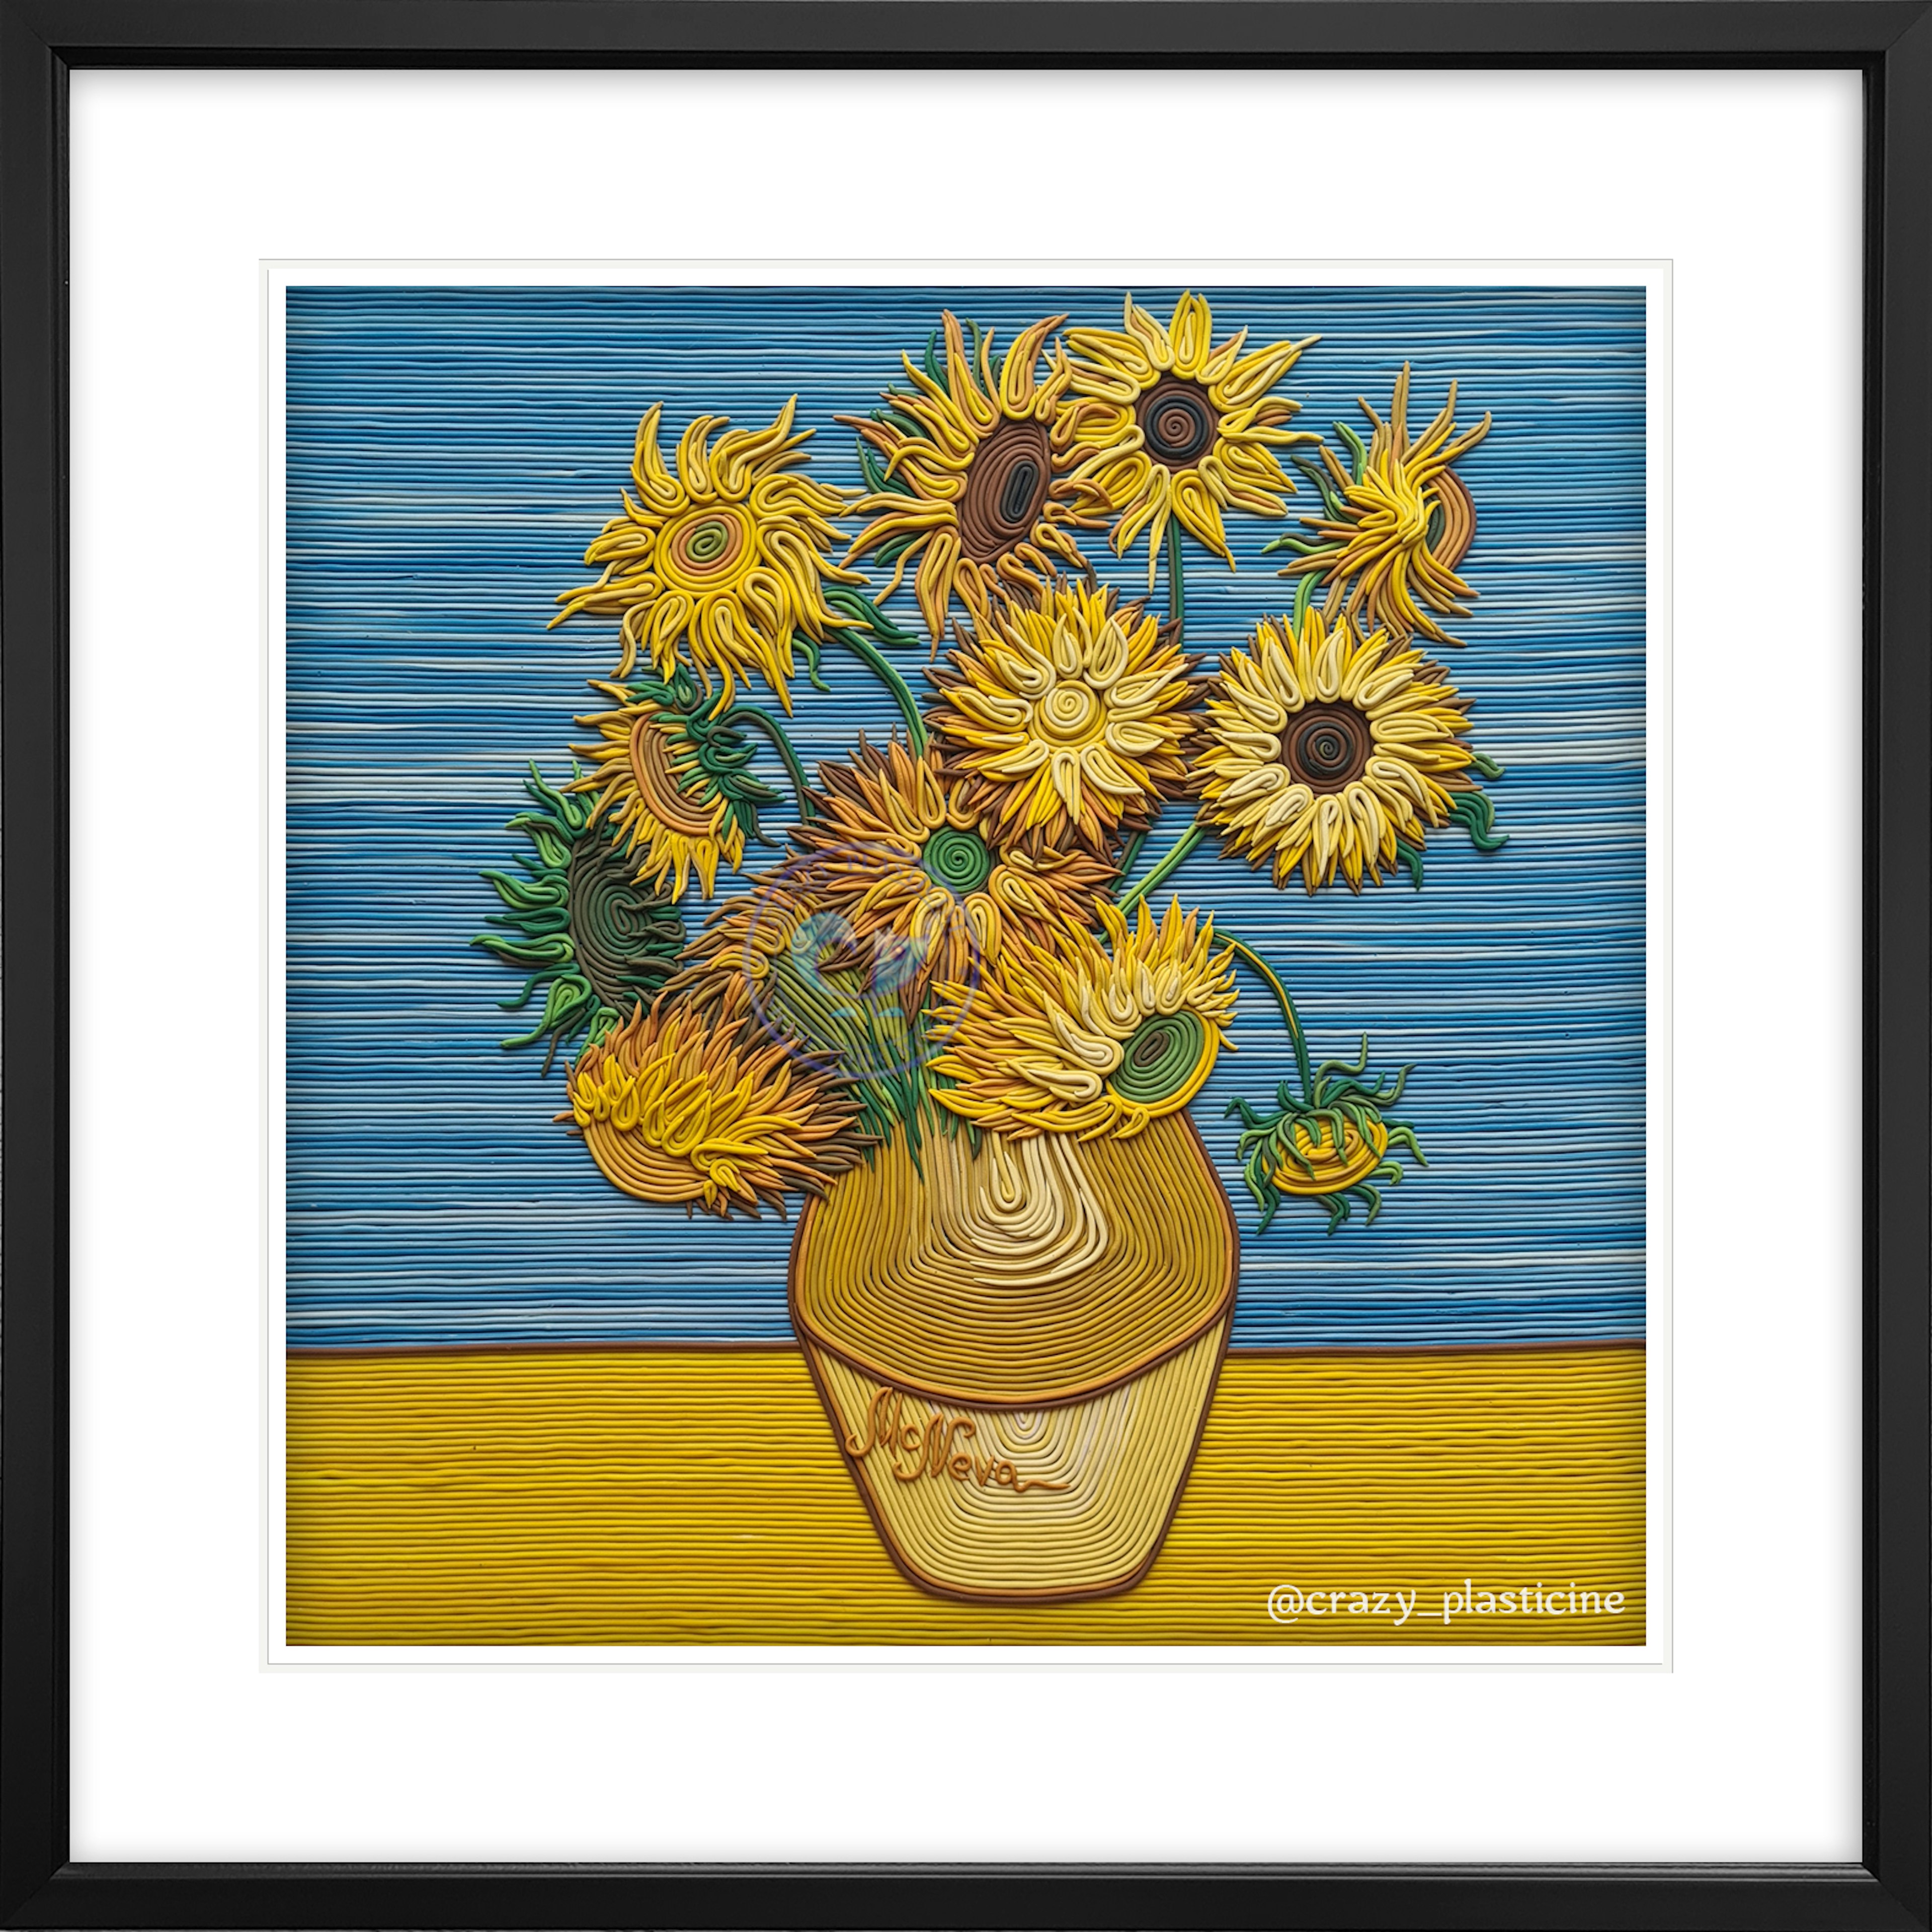 Main image for Noodle Sunflowers plasticine painting